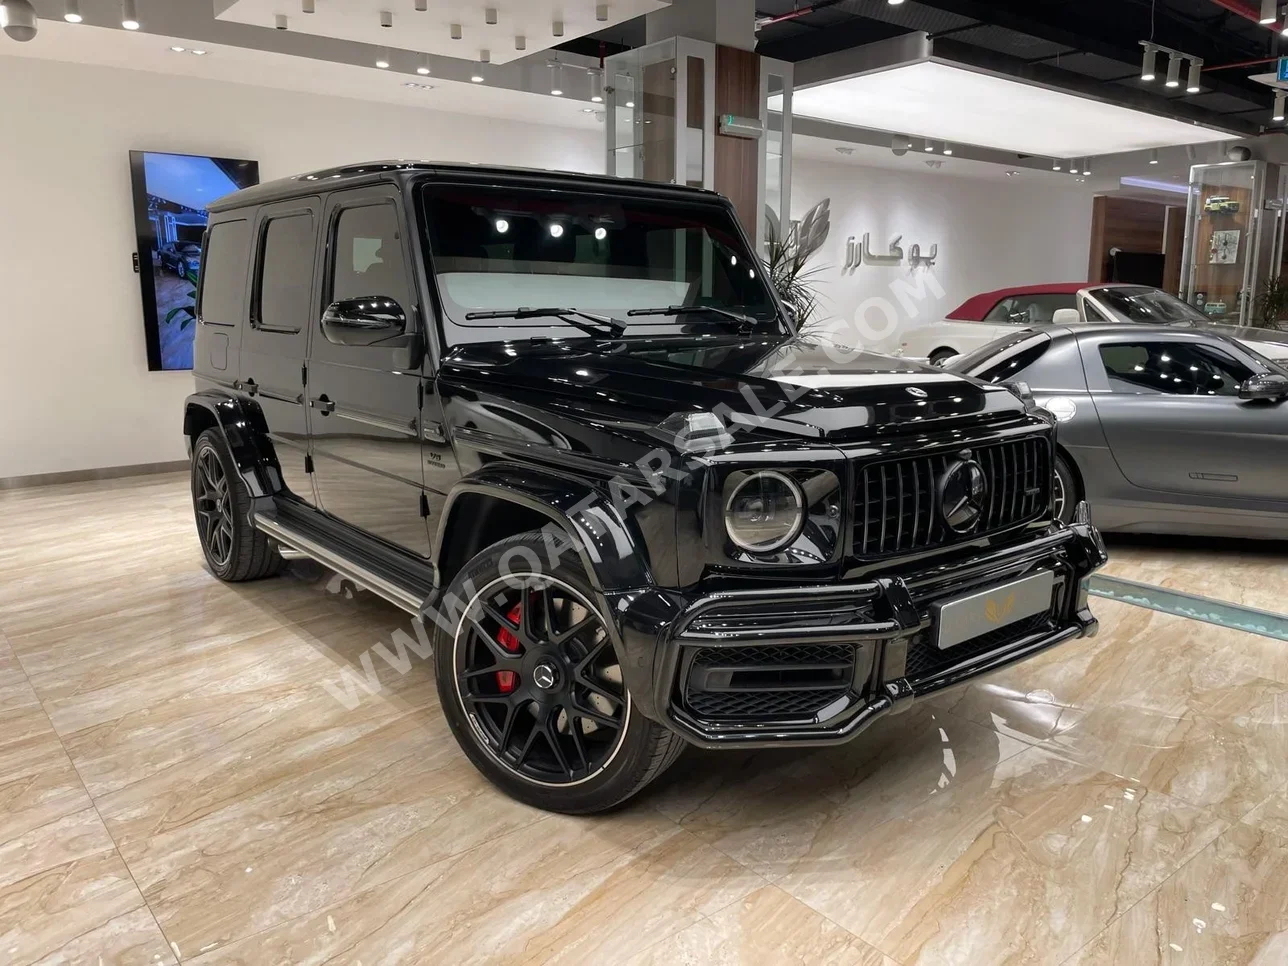 Mercedes-Benz  G-Class  63 AMG  2021  Automatic  41,000 Km  8 Cylinder  Four Wheel Drive (4WD)  SUV  Black  With Warranty